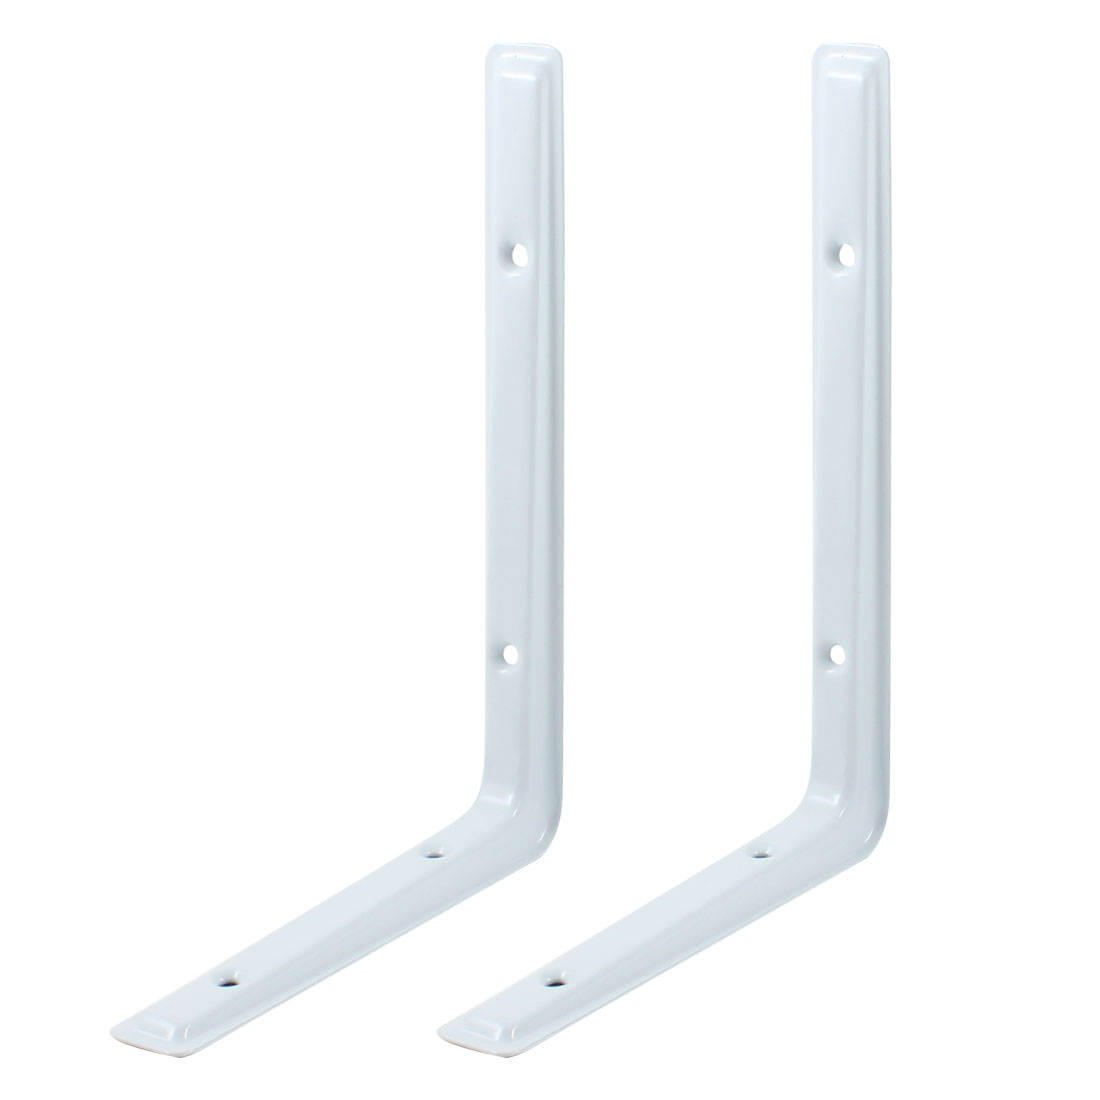 Uxcell 6" x 8" Metal Right Angle Bracket Shelf Off White Replacement, 2 Pack - image 1 of 4